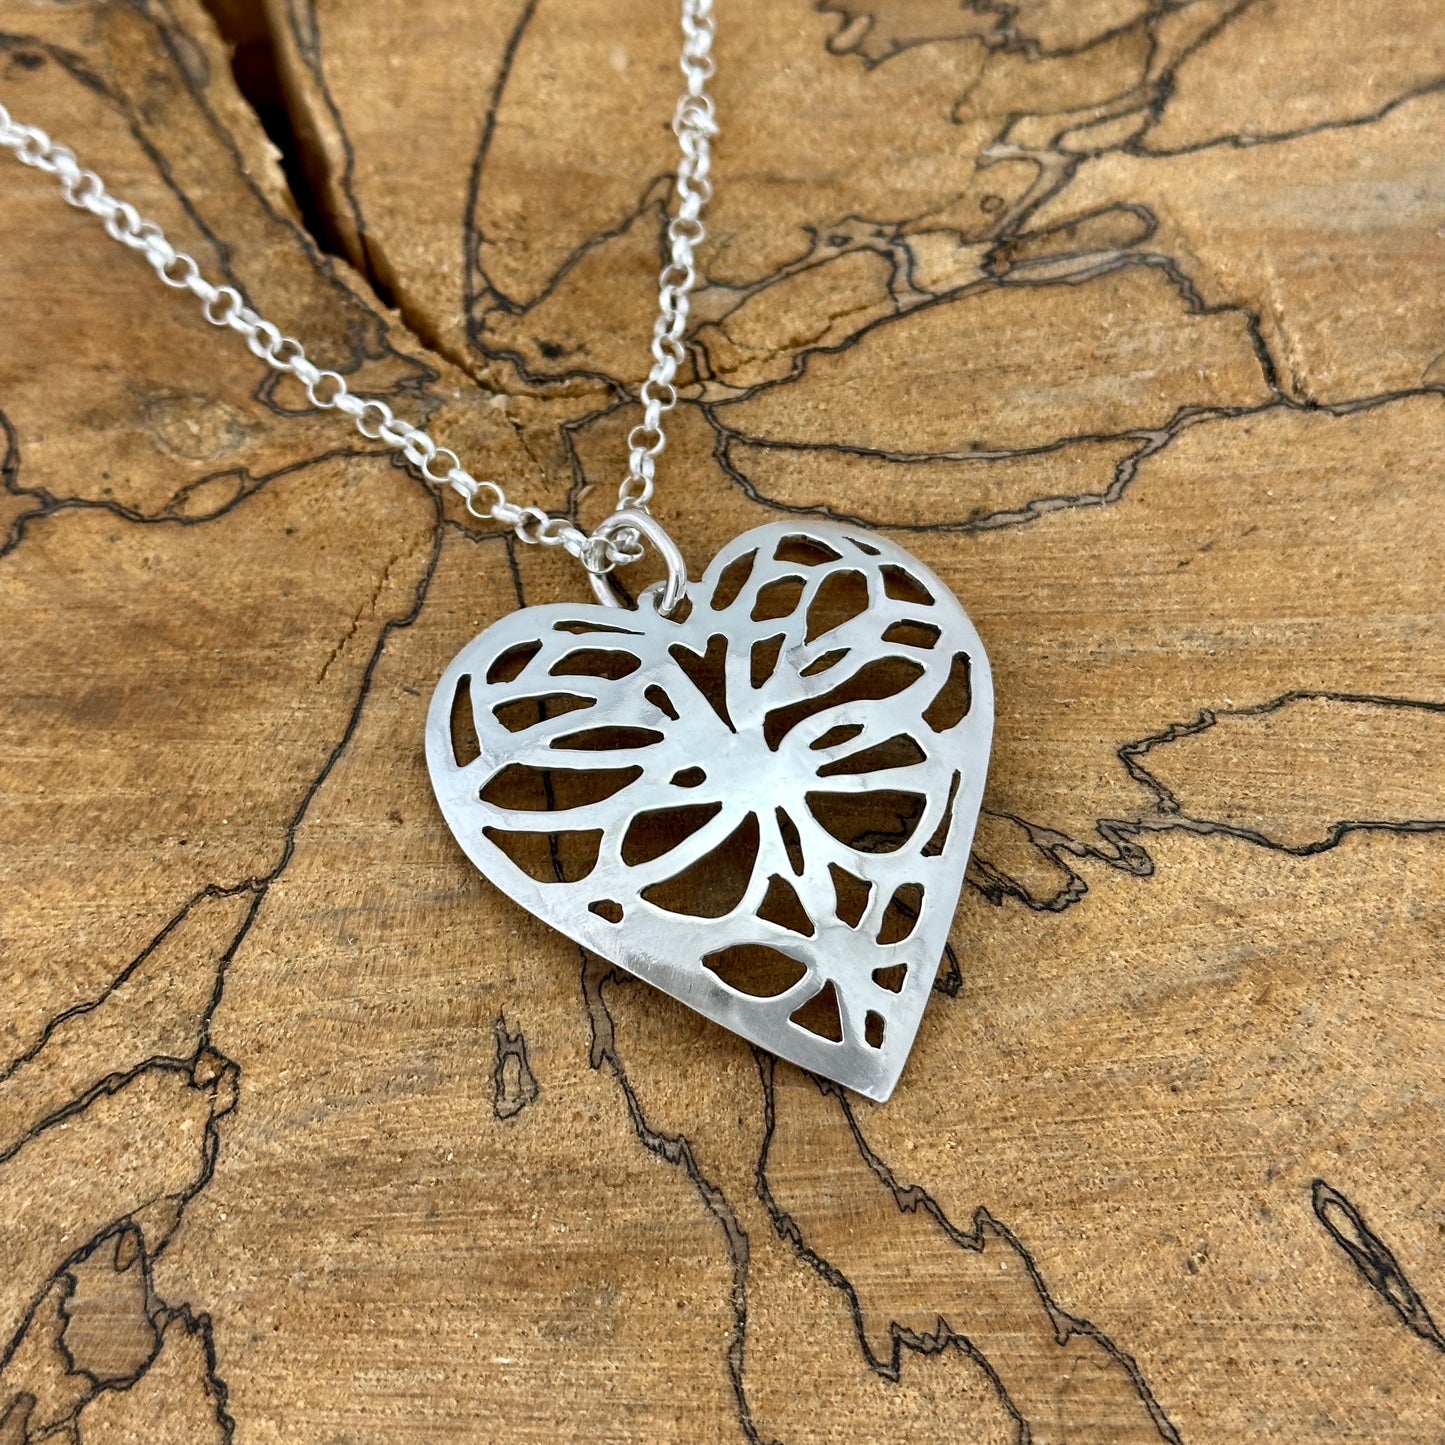 Full Heart Necklace